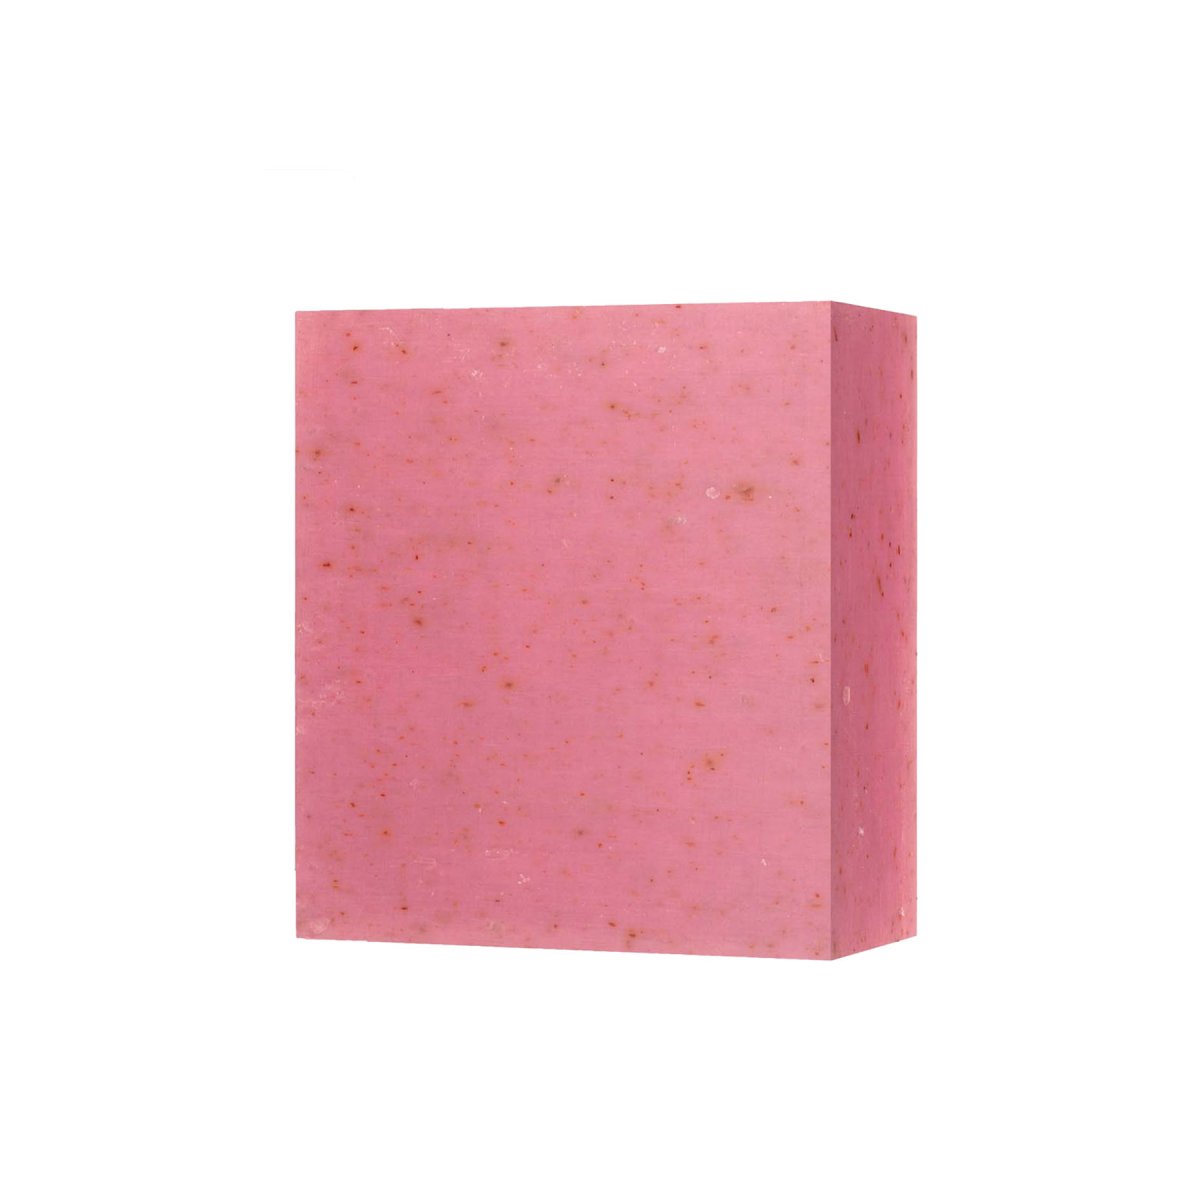 Super X Facial Cleansing Bar 100g - skinChemists